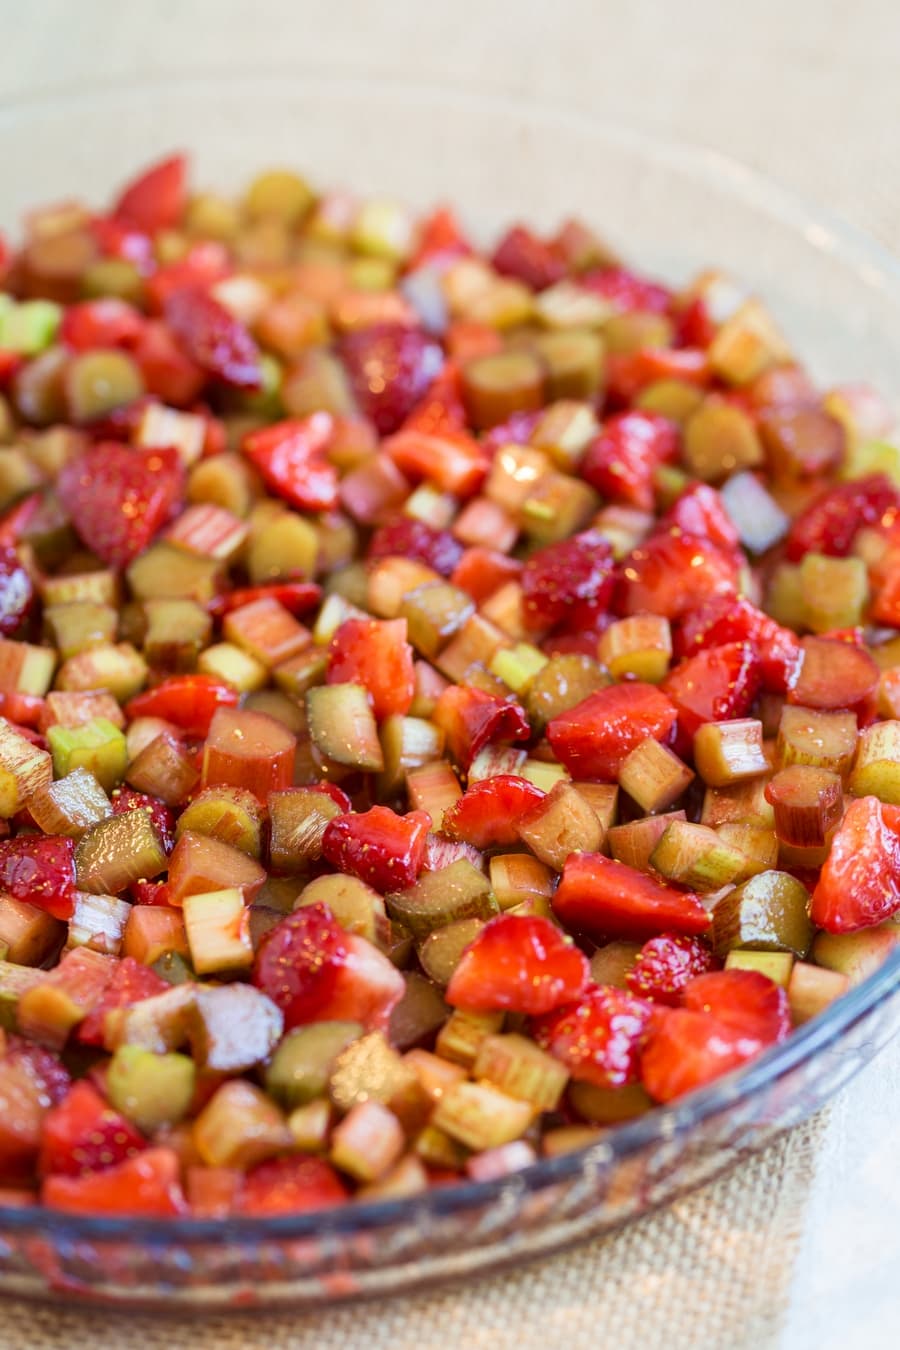 Diced strawberry and rhubarb over the bottom of a tart pan.